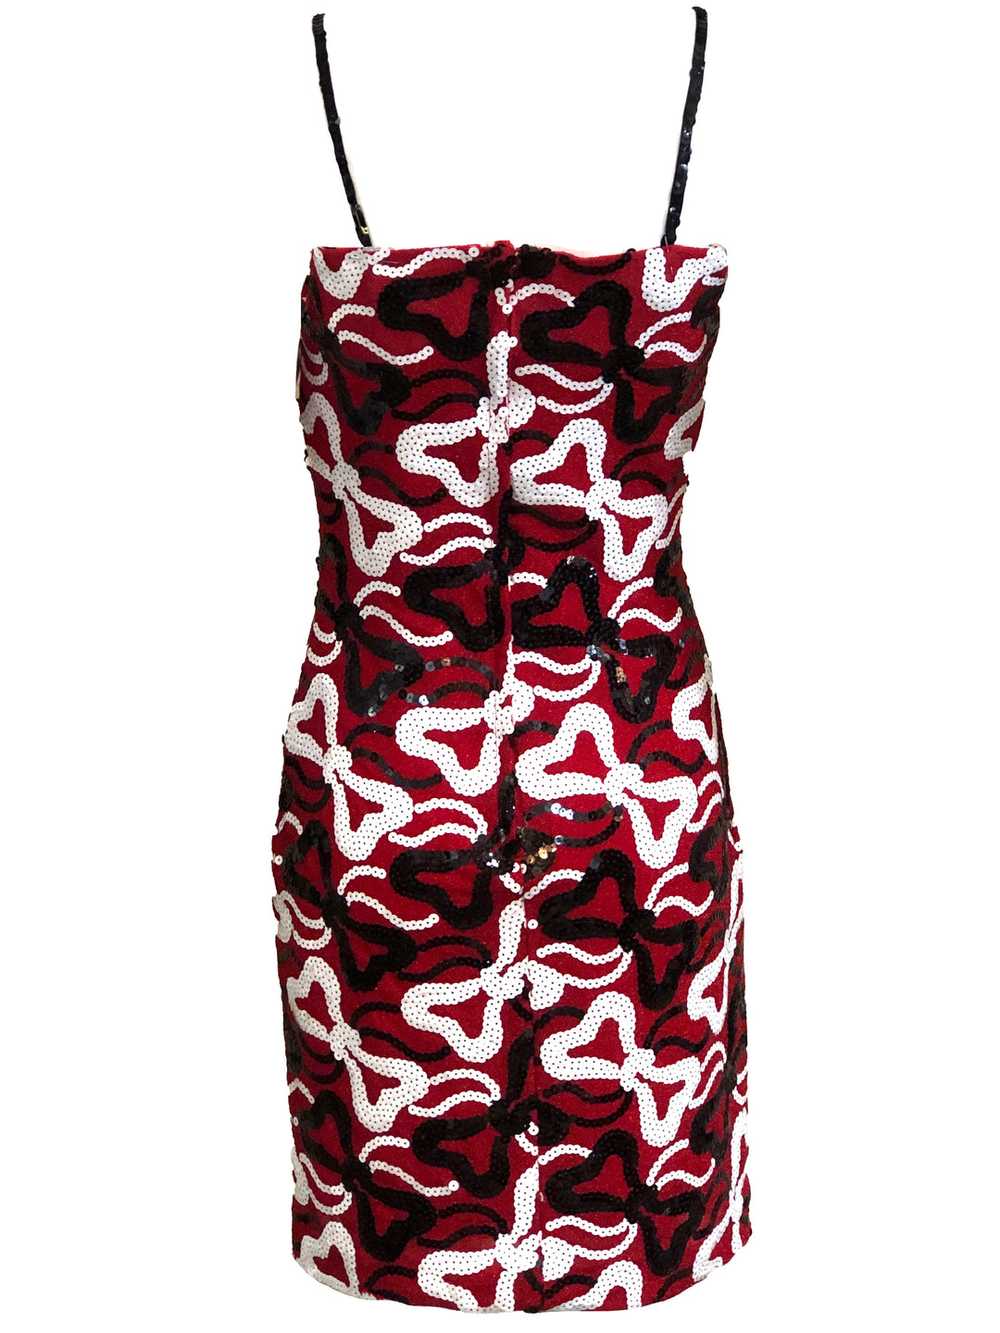 90s Red Dress with Black and White Palette Bows - image 2